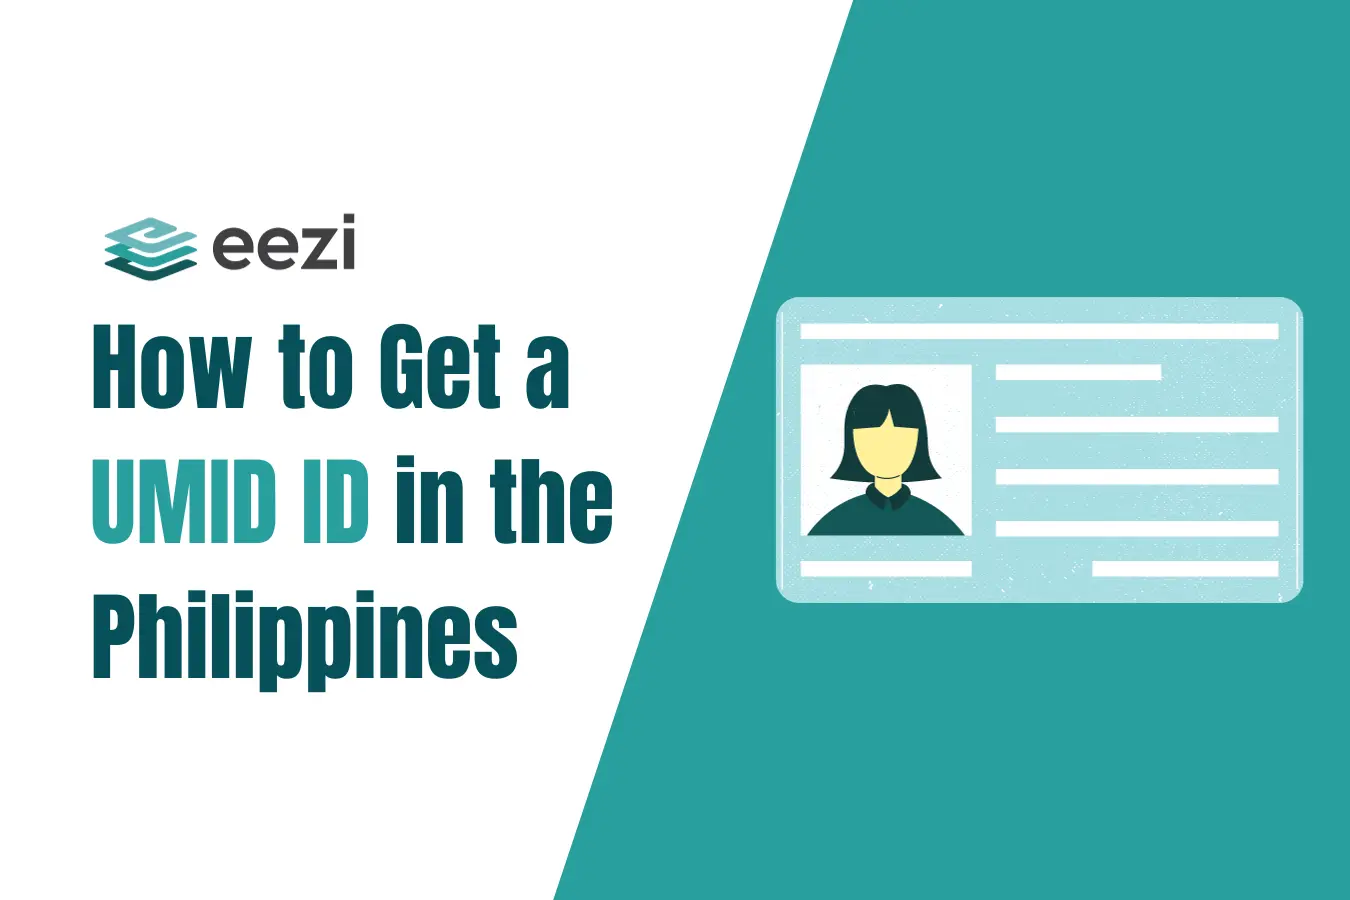 How to Get a UMID ID in the Philippines